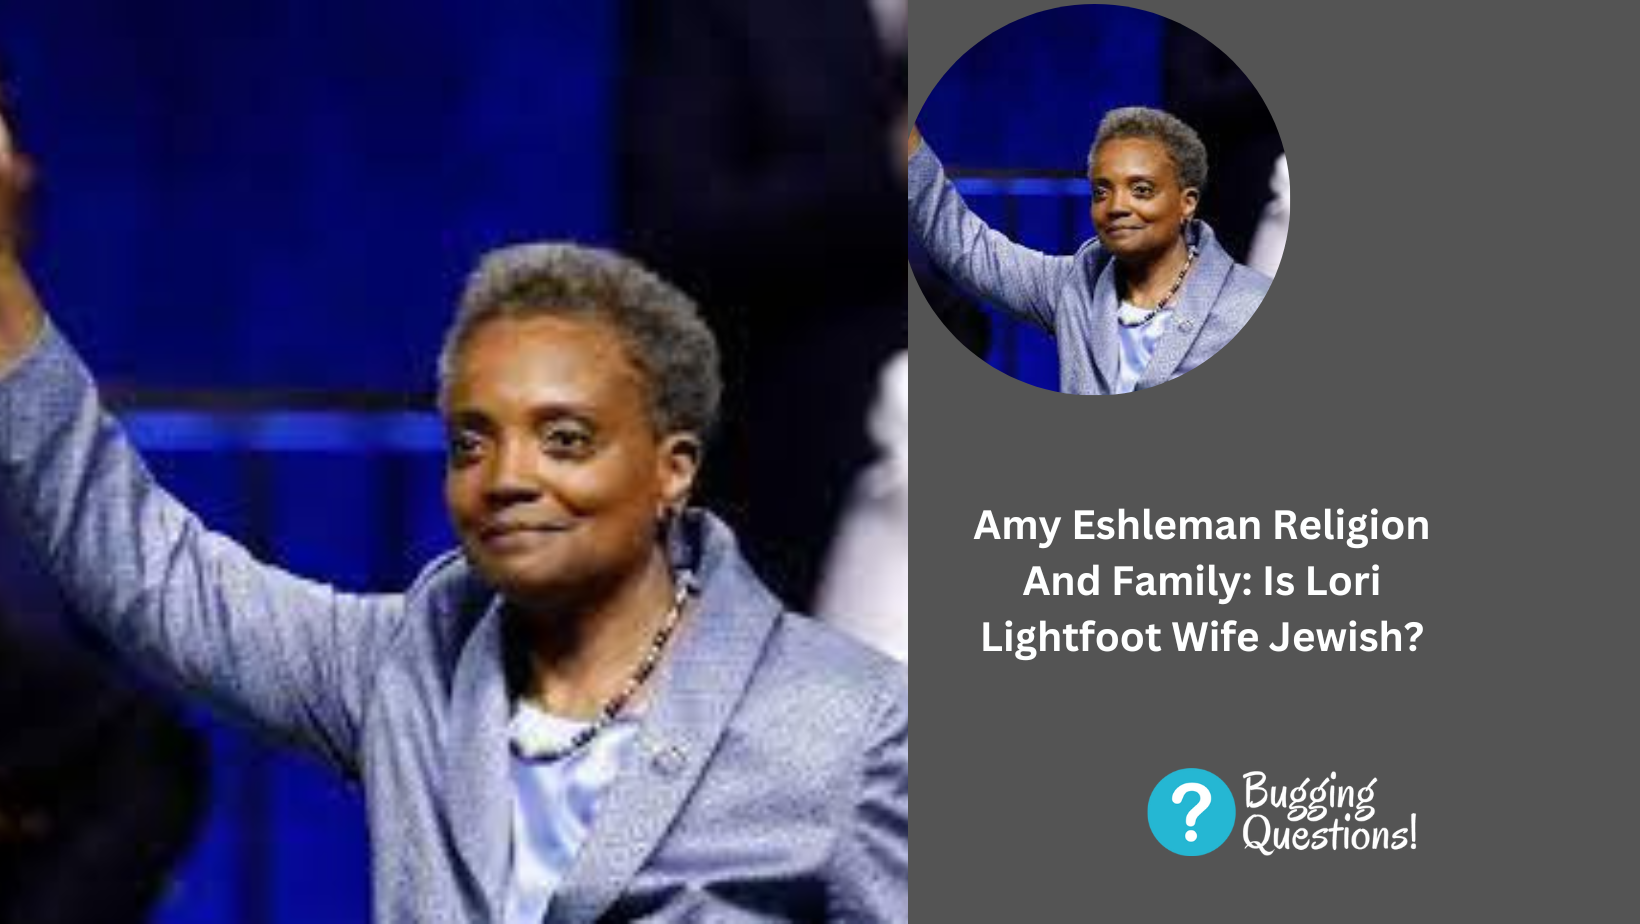 Amy Eshleman Religion And Family: Is Lori Lightfoot Wife Jewish?